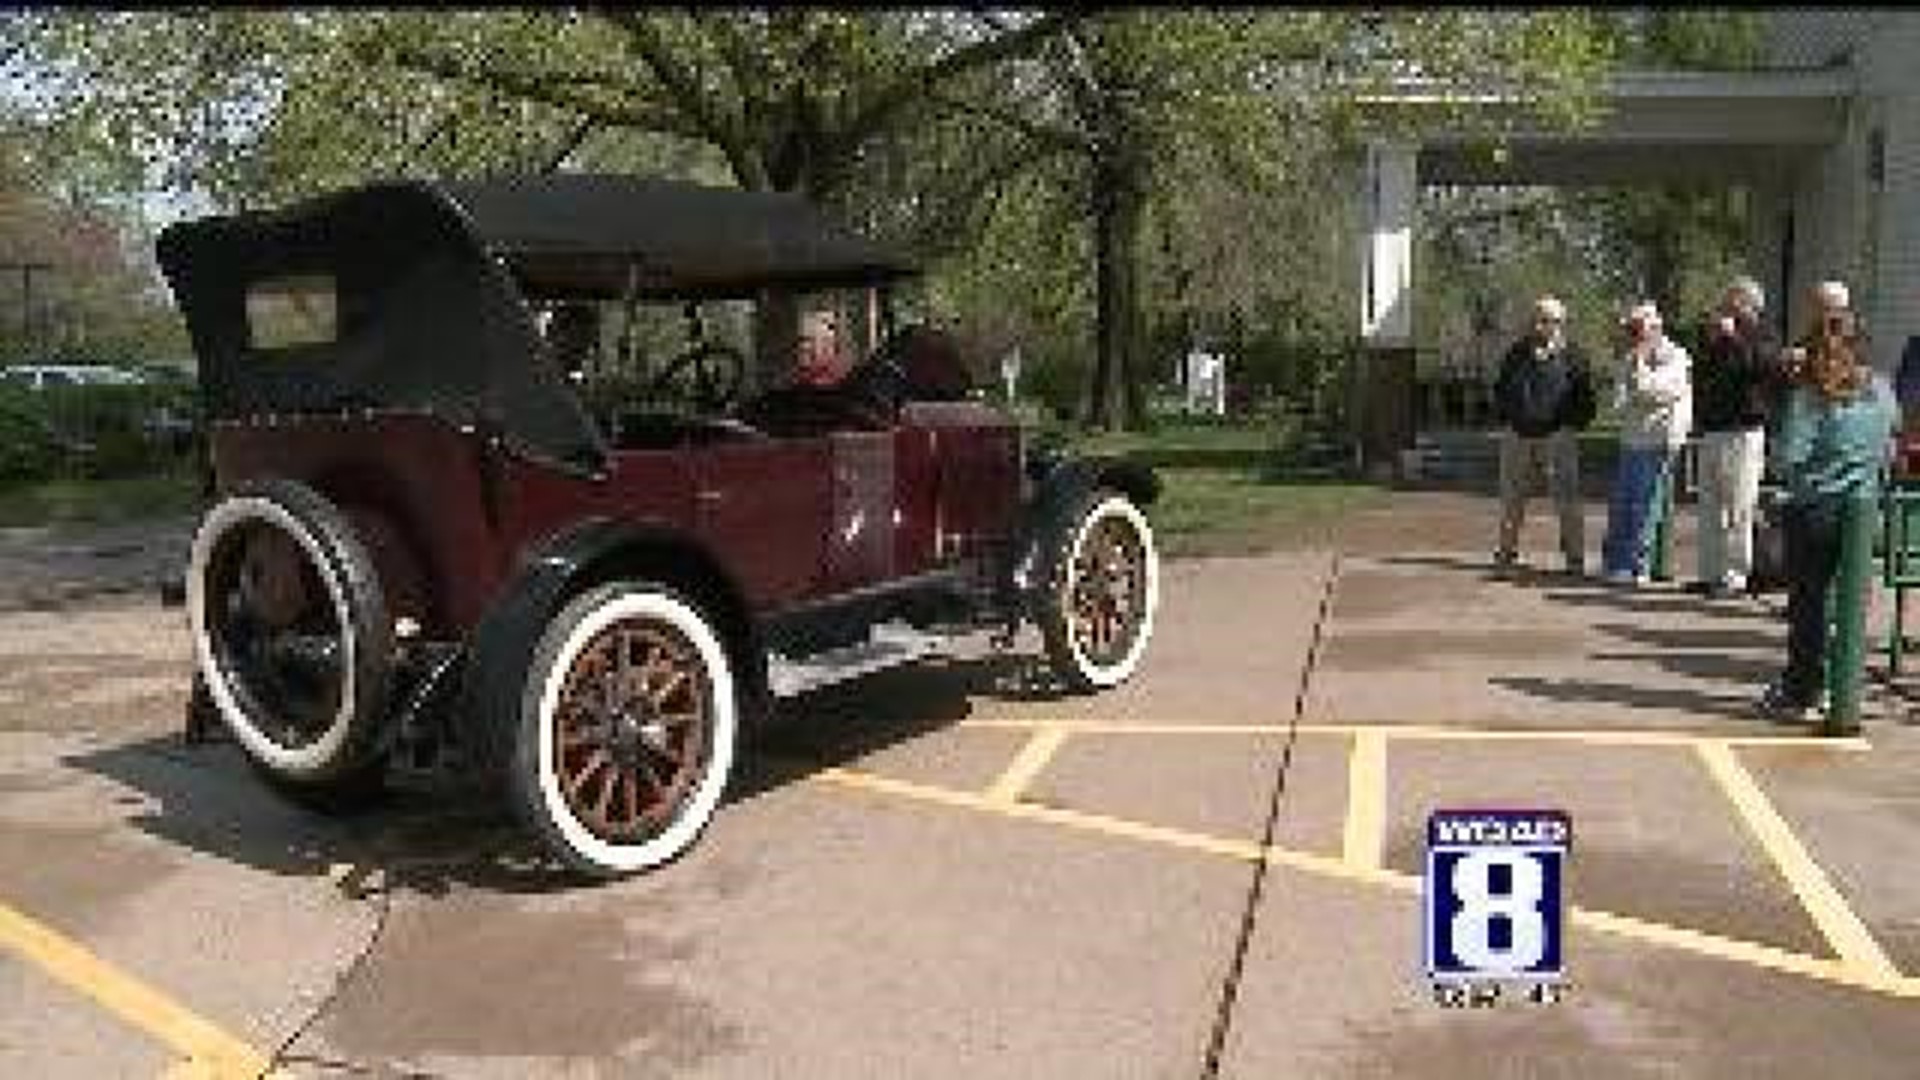 Historic Velie car donated to local museum